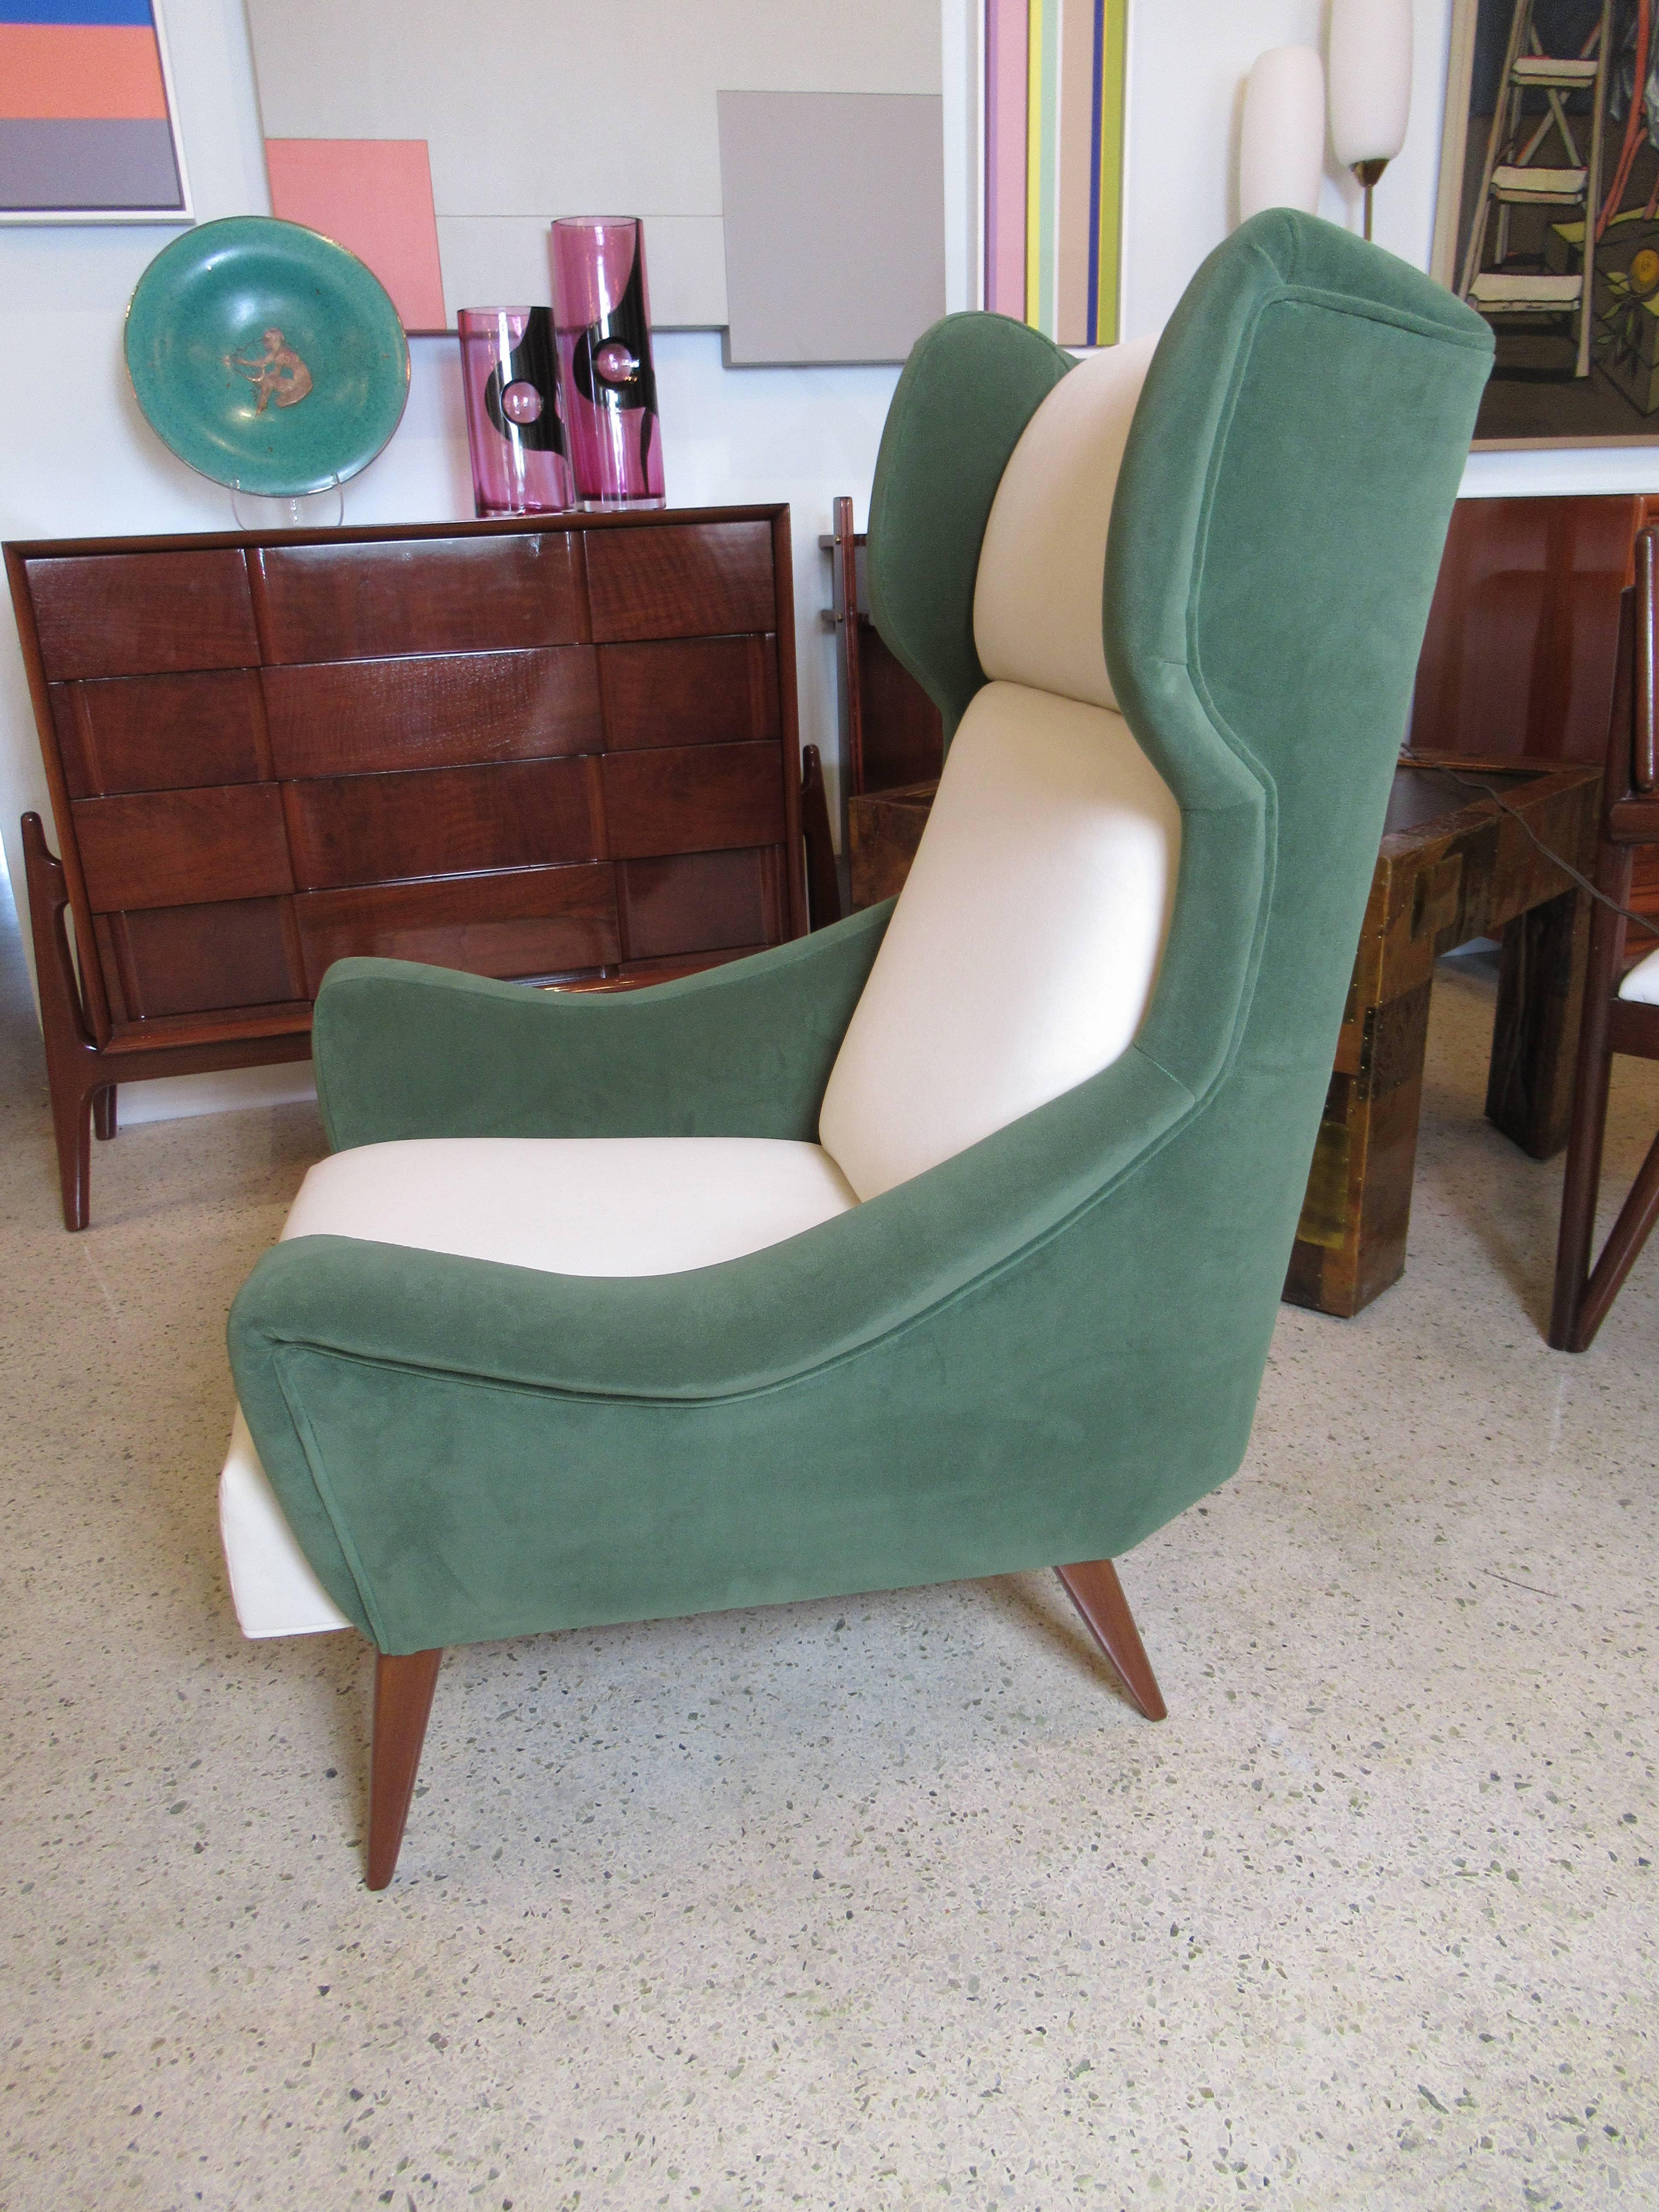 Italian Modern Upholstered Wing Chair, Gio Ponti, 1950's For Sale 2